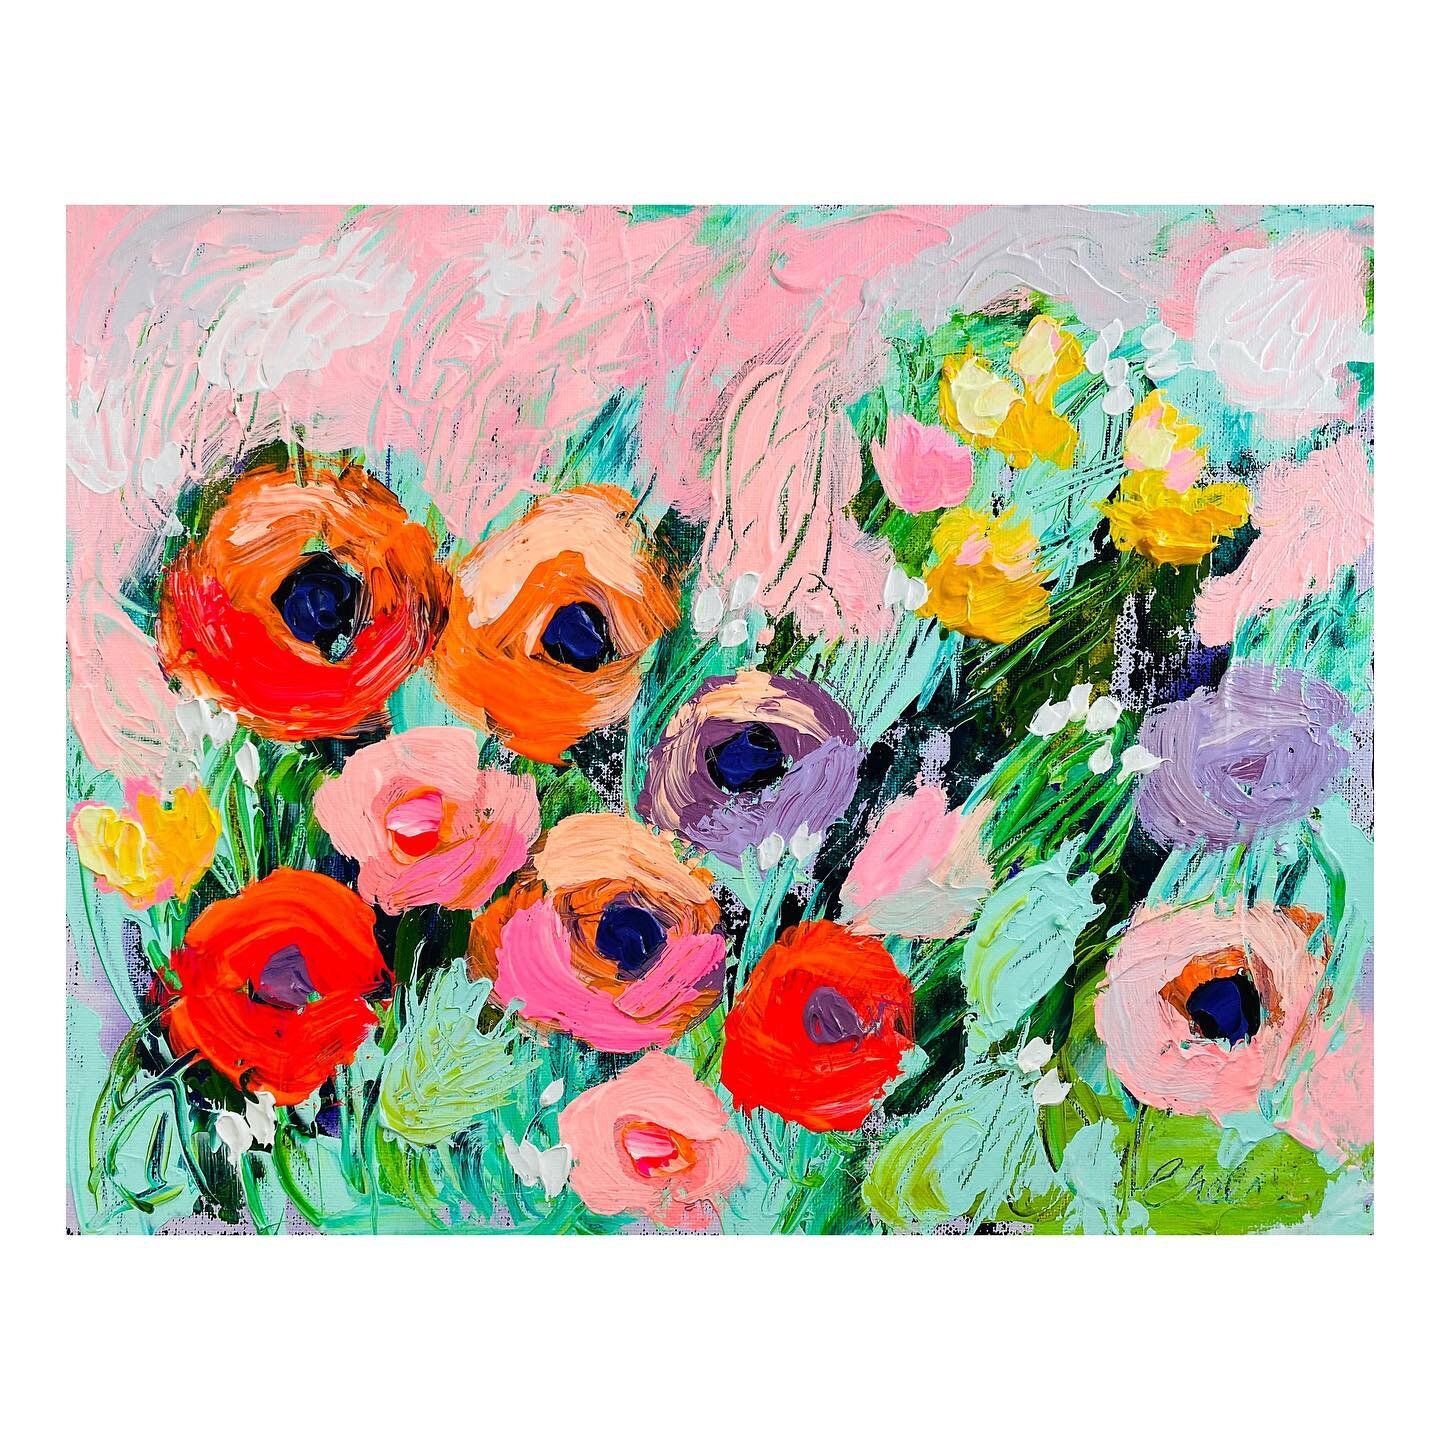 Who&rsquo;s got two thumbs and is ready to see all the flowers blooming and trees budding this spring...this girl!! 😄🌸🌳

These florals are 11&rdquo;x14&rdquo; on canvas board. Available in a white wood frame or as is. Check out all the different c